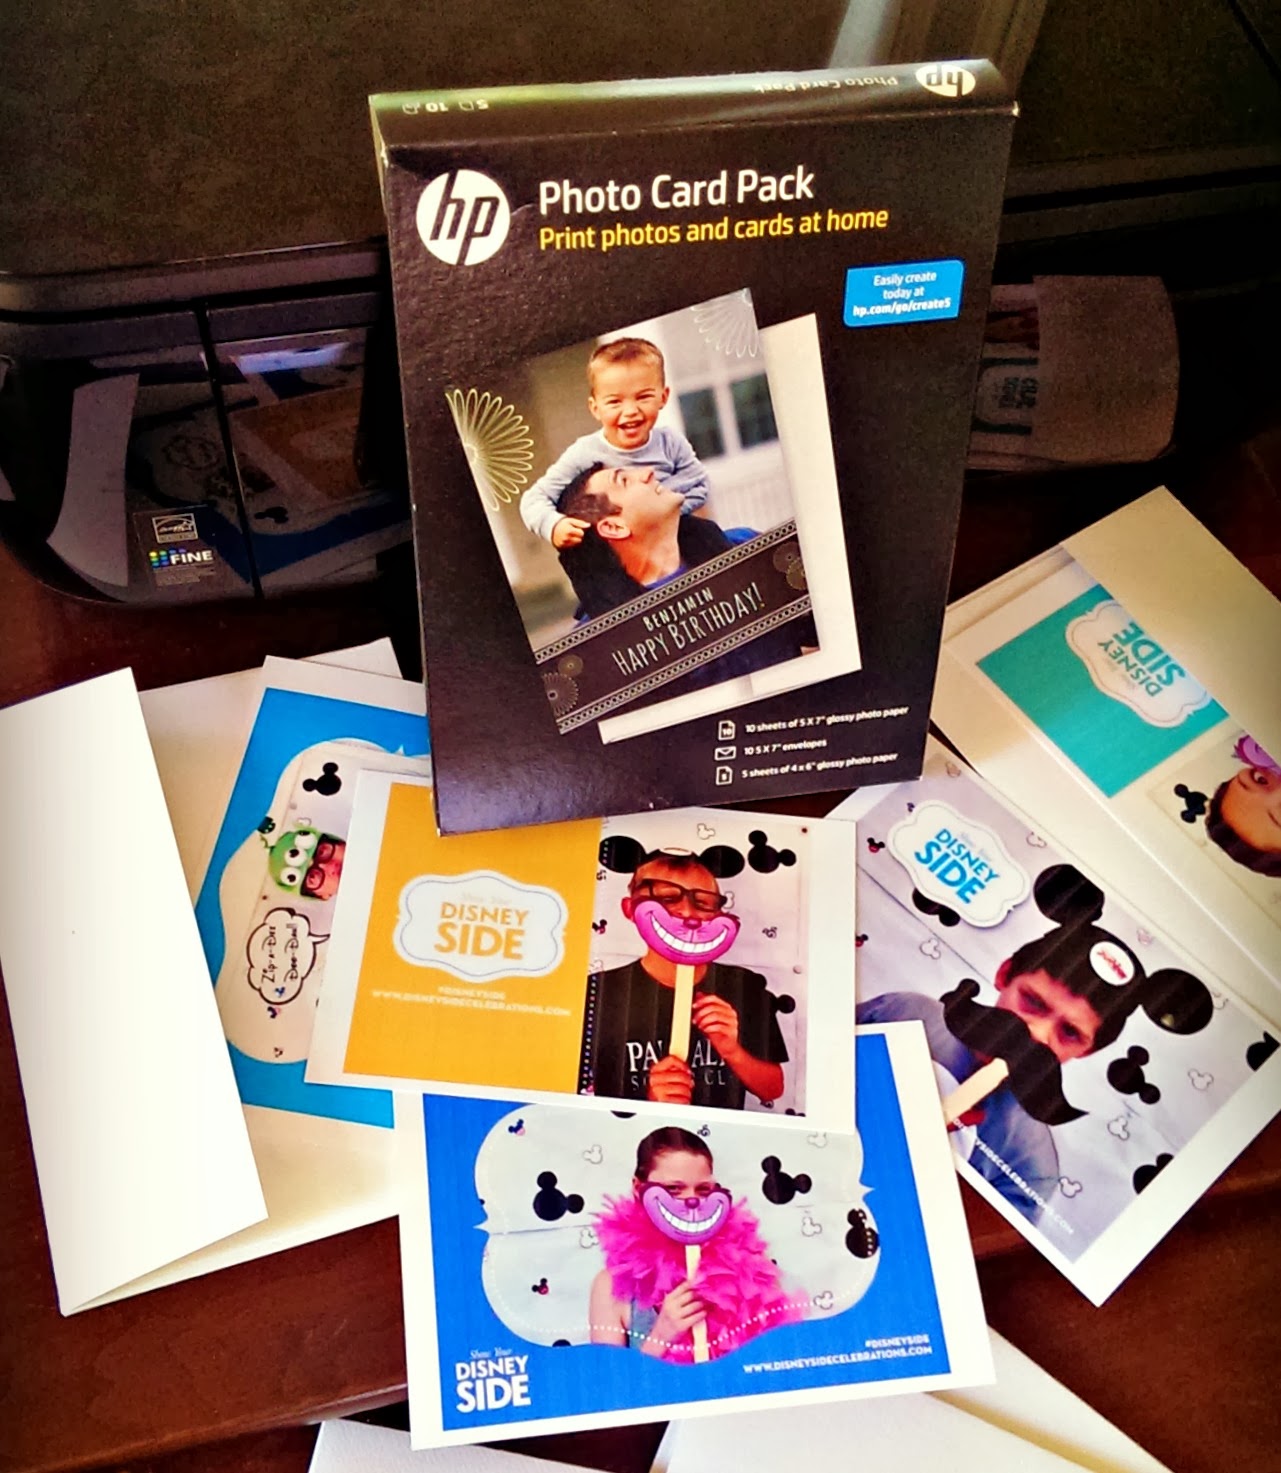 printed DisneySide photo cards from HP